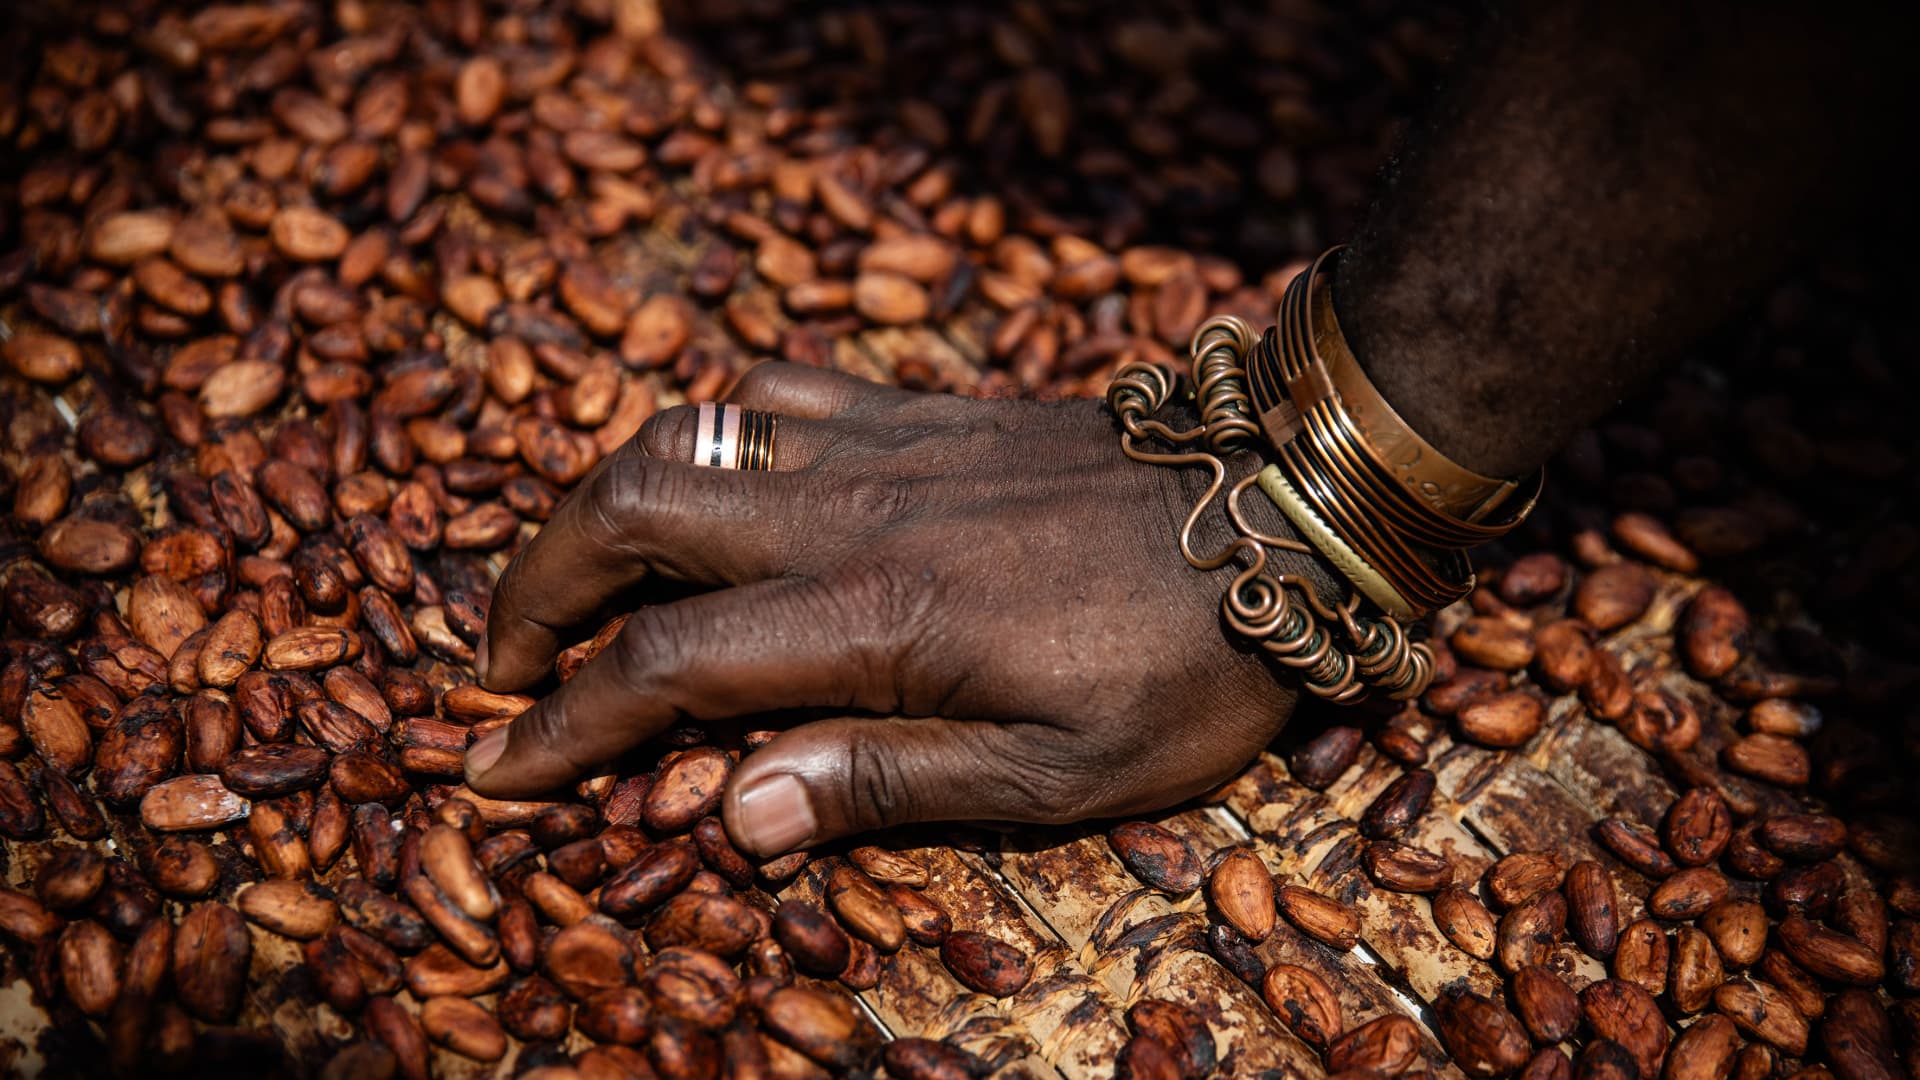 The hand of Alain Kablan Porquet in dry cocoa beans, in Gagnoa, Ivory Coast.